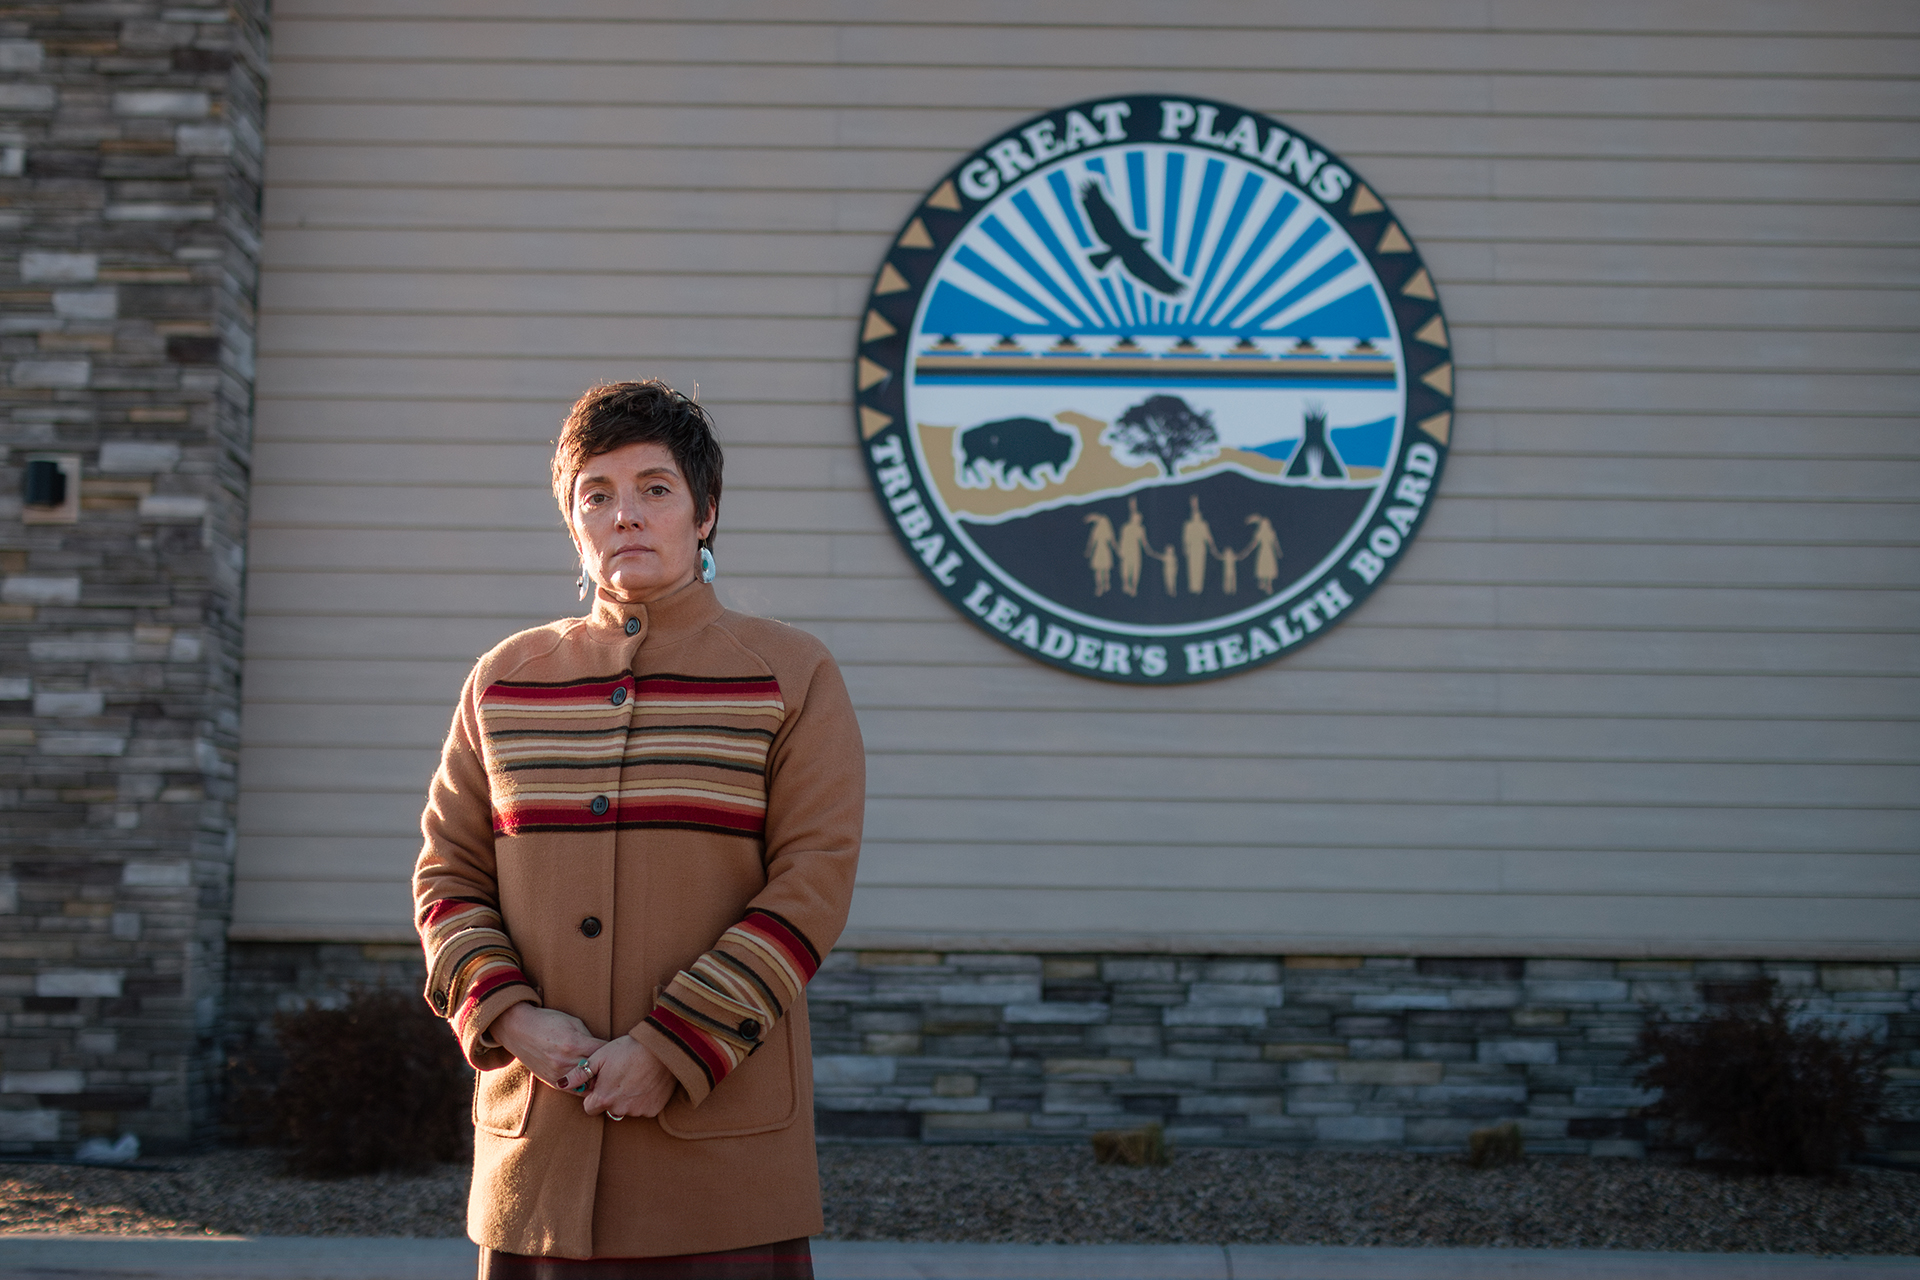 A woman with short hair stands in front of a building with stone details. A large circular sign reads “Great Plains Tribal Leader’s Health Board.”